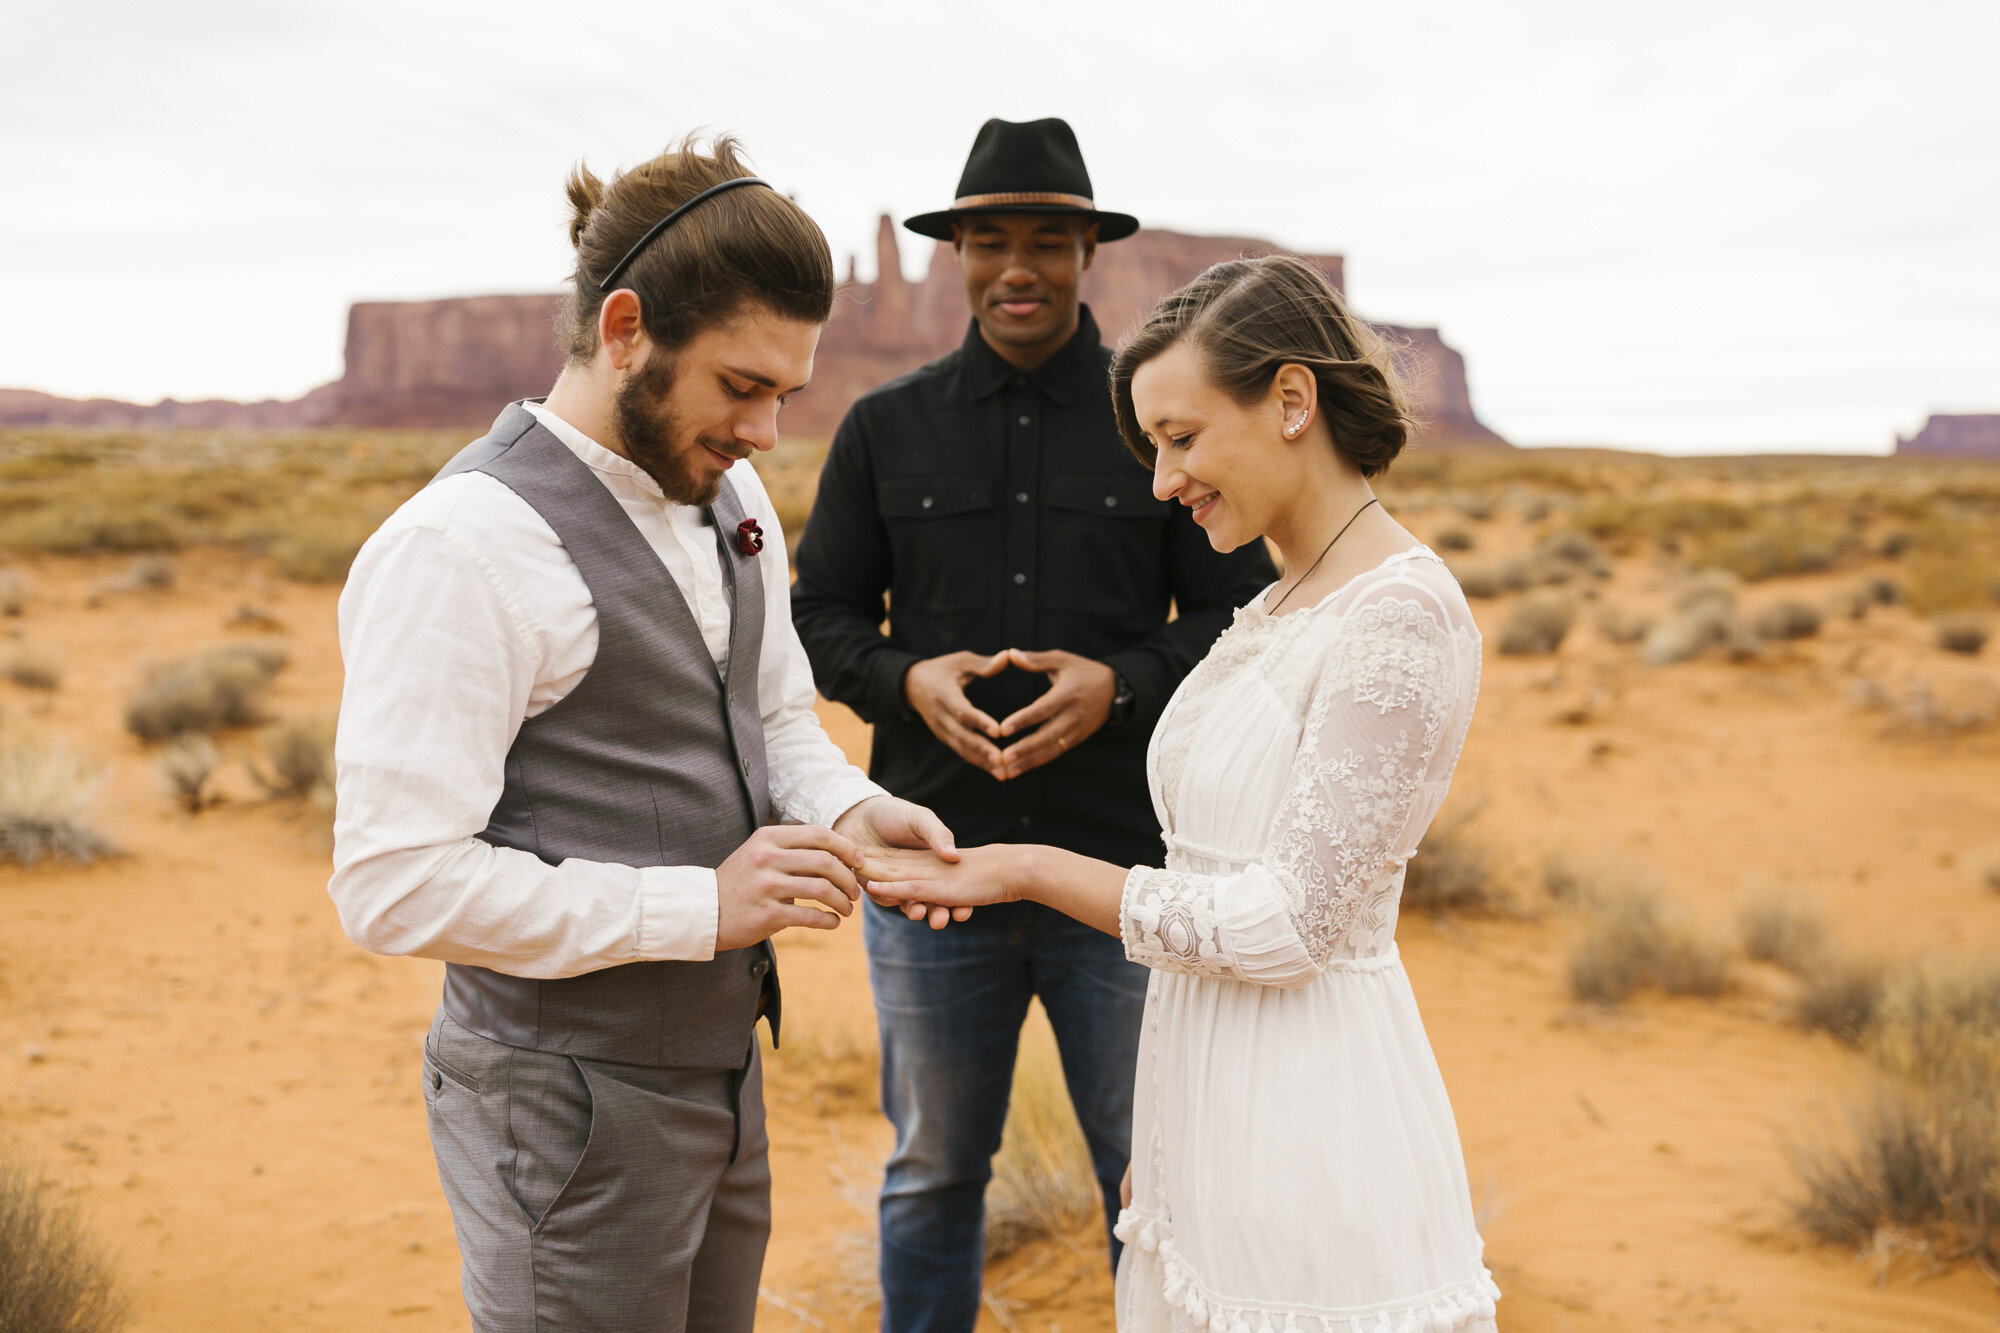 Bride and groom exchange rings during their ceremony at their Monument Valley wedding